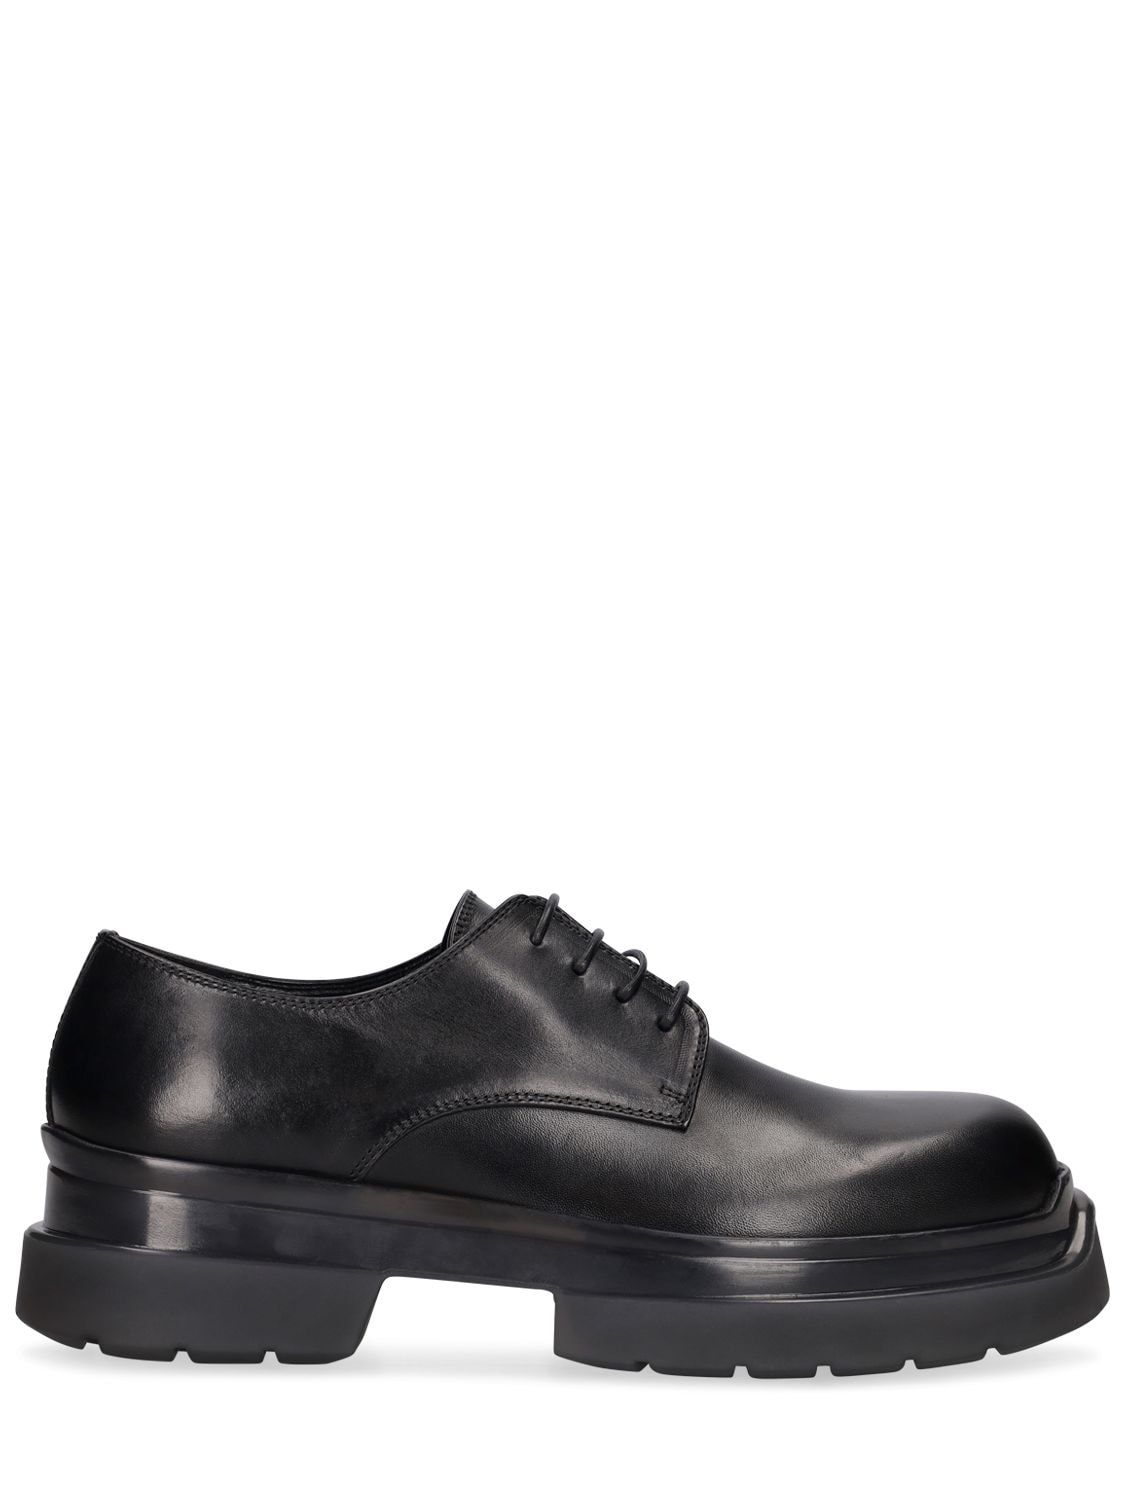 ANN DEMEULEMEESTER MICHELE DERBY LACE-UP SHOES